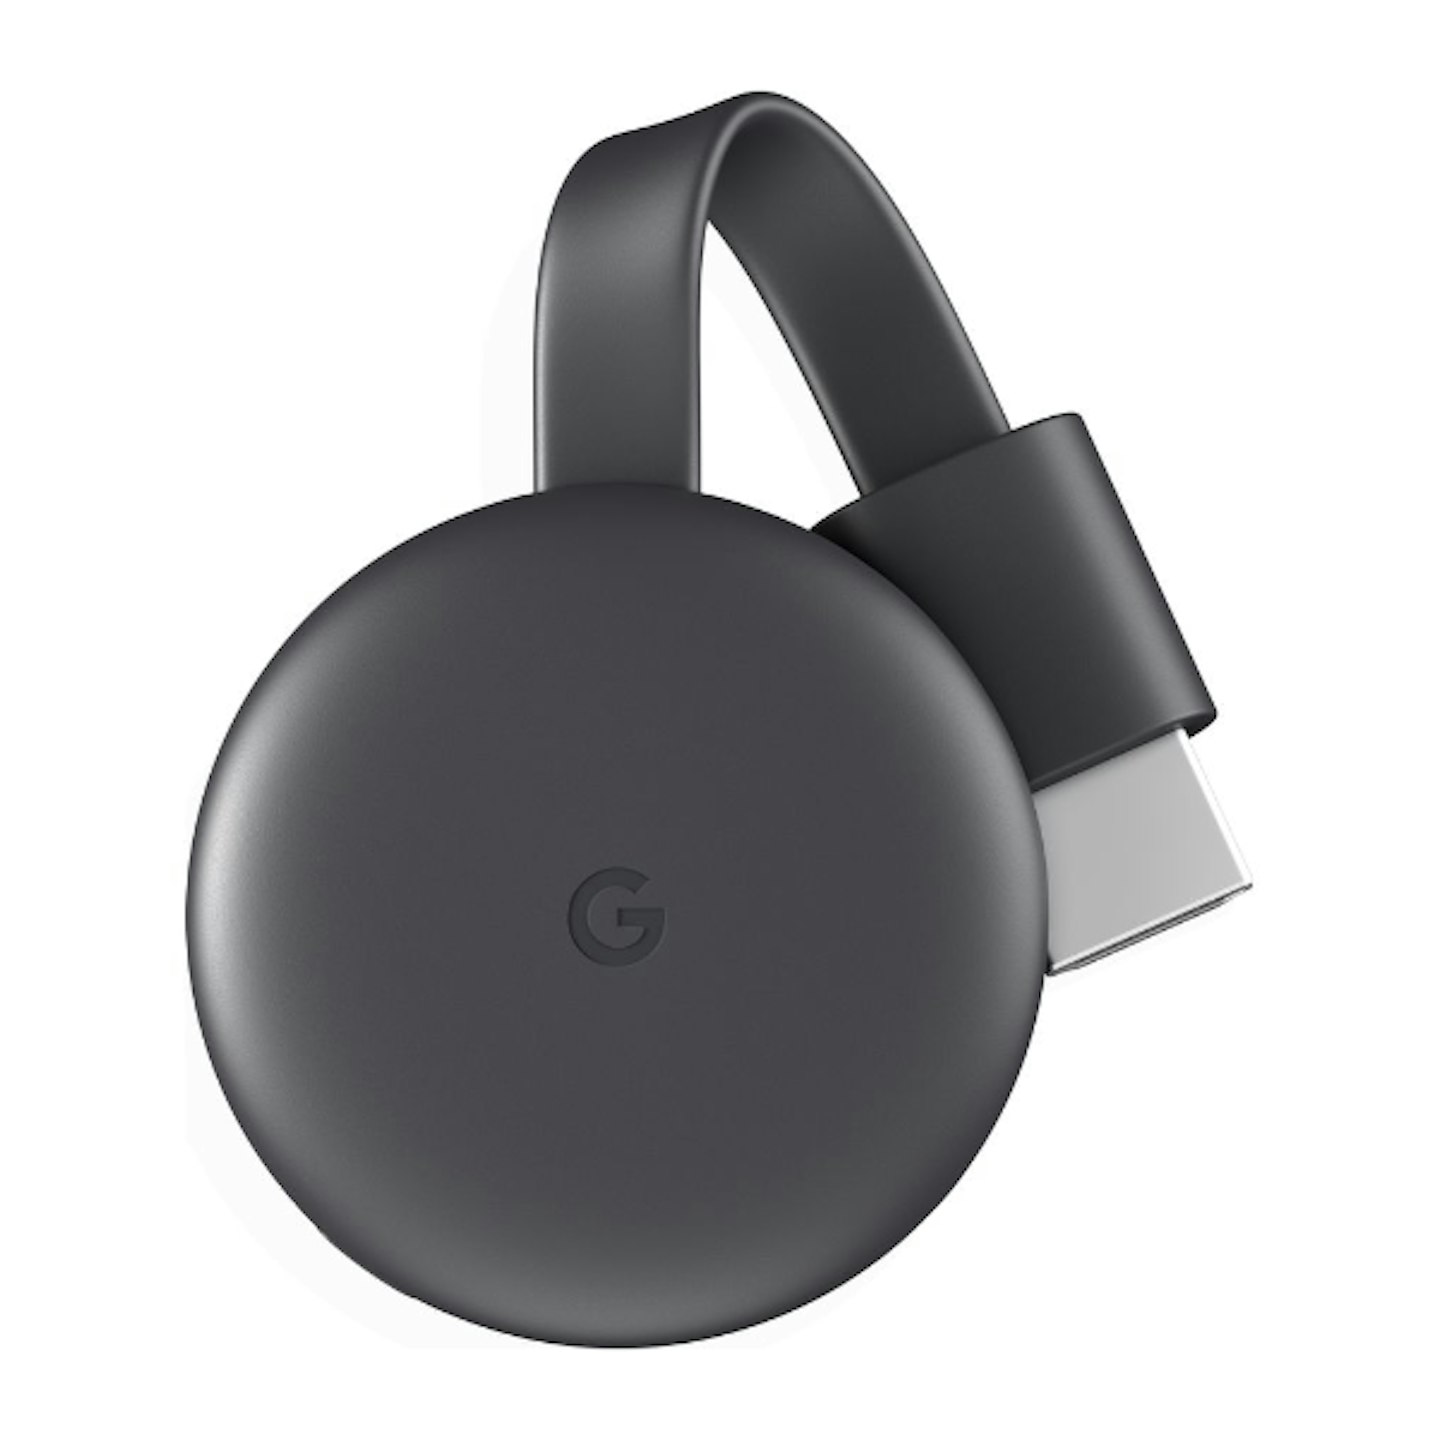 Google Chromecast 3rd Gen - one of the Best streaming devices